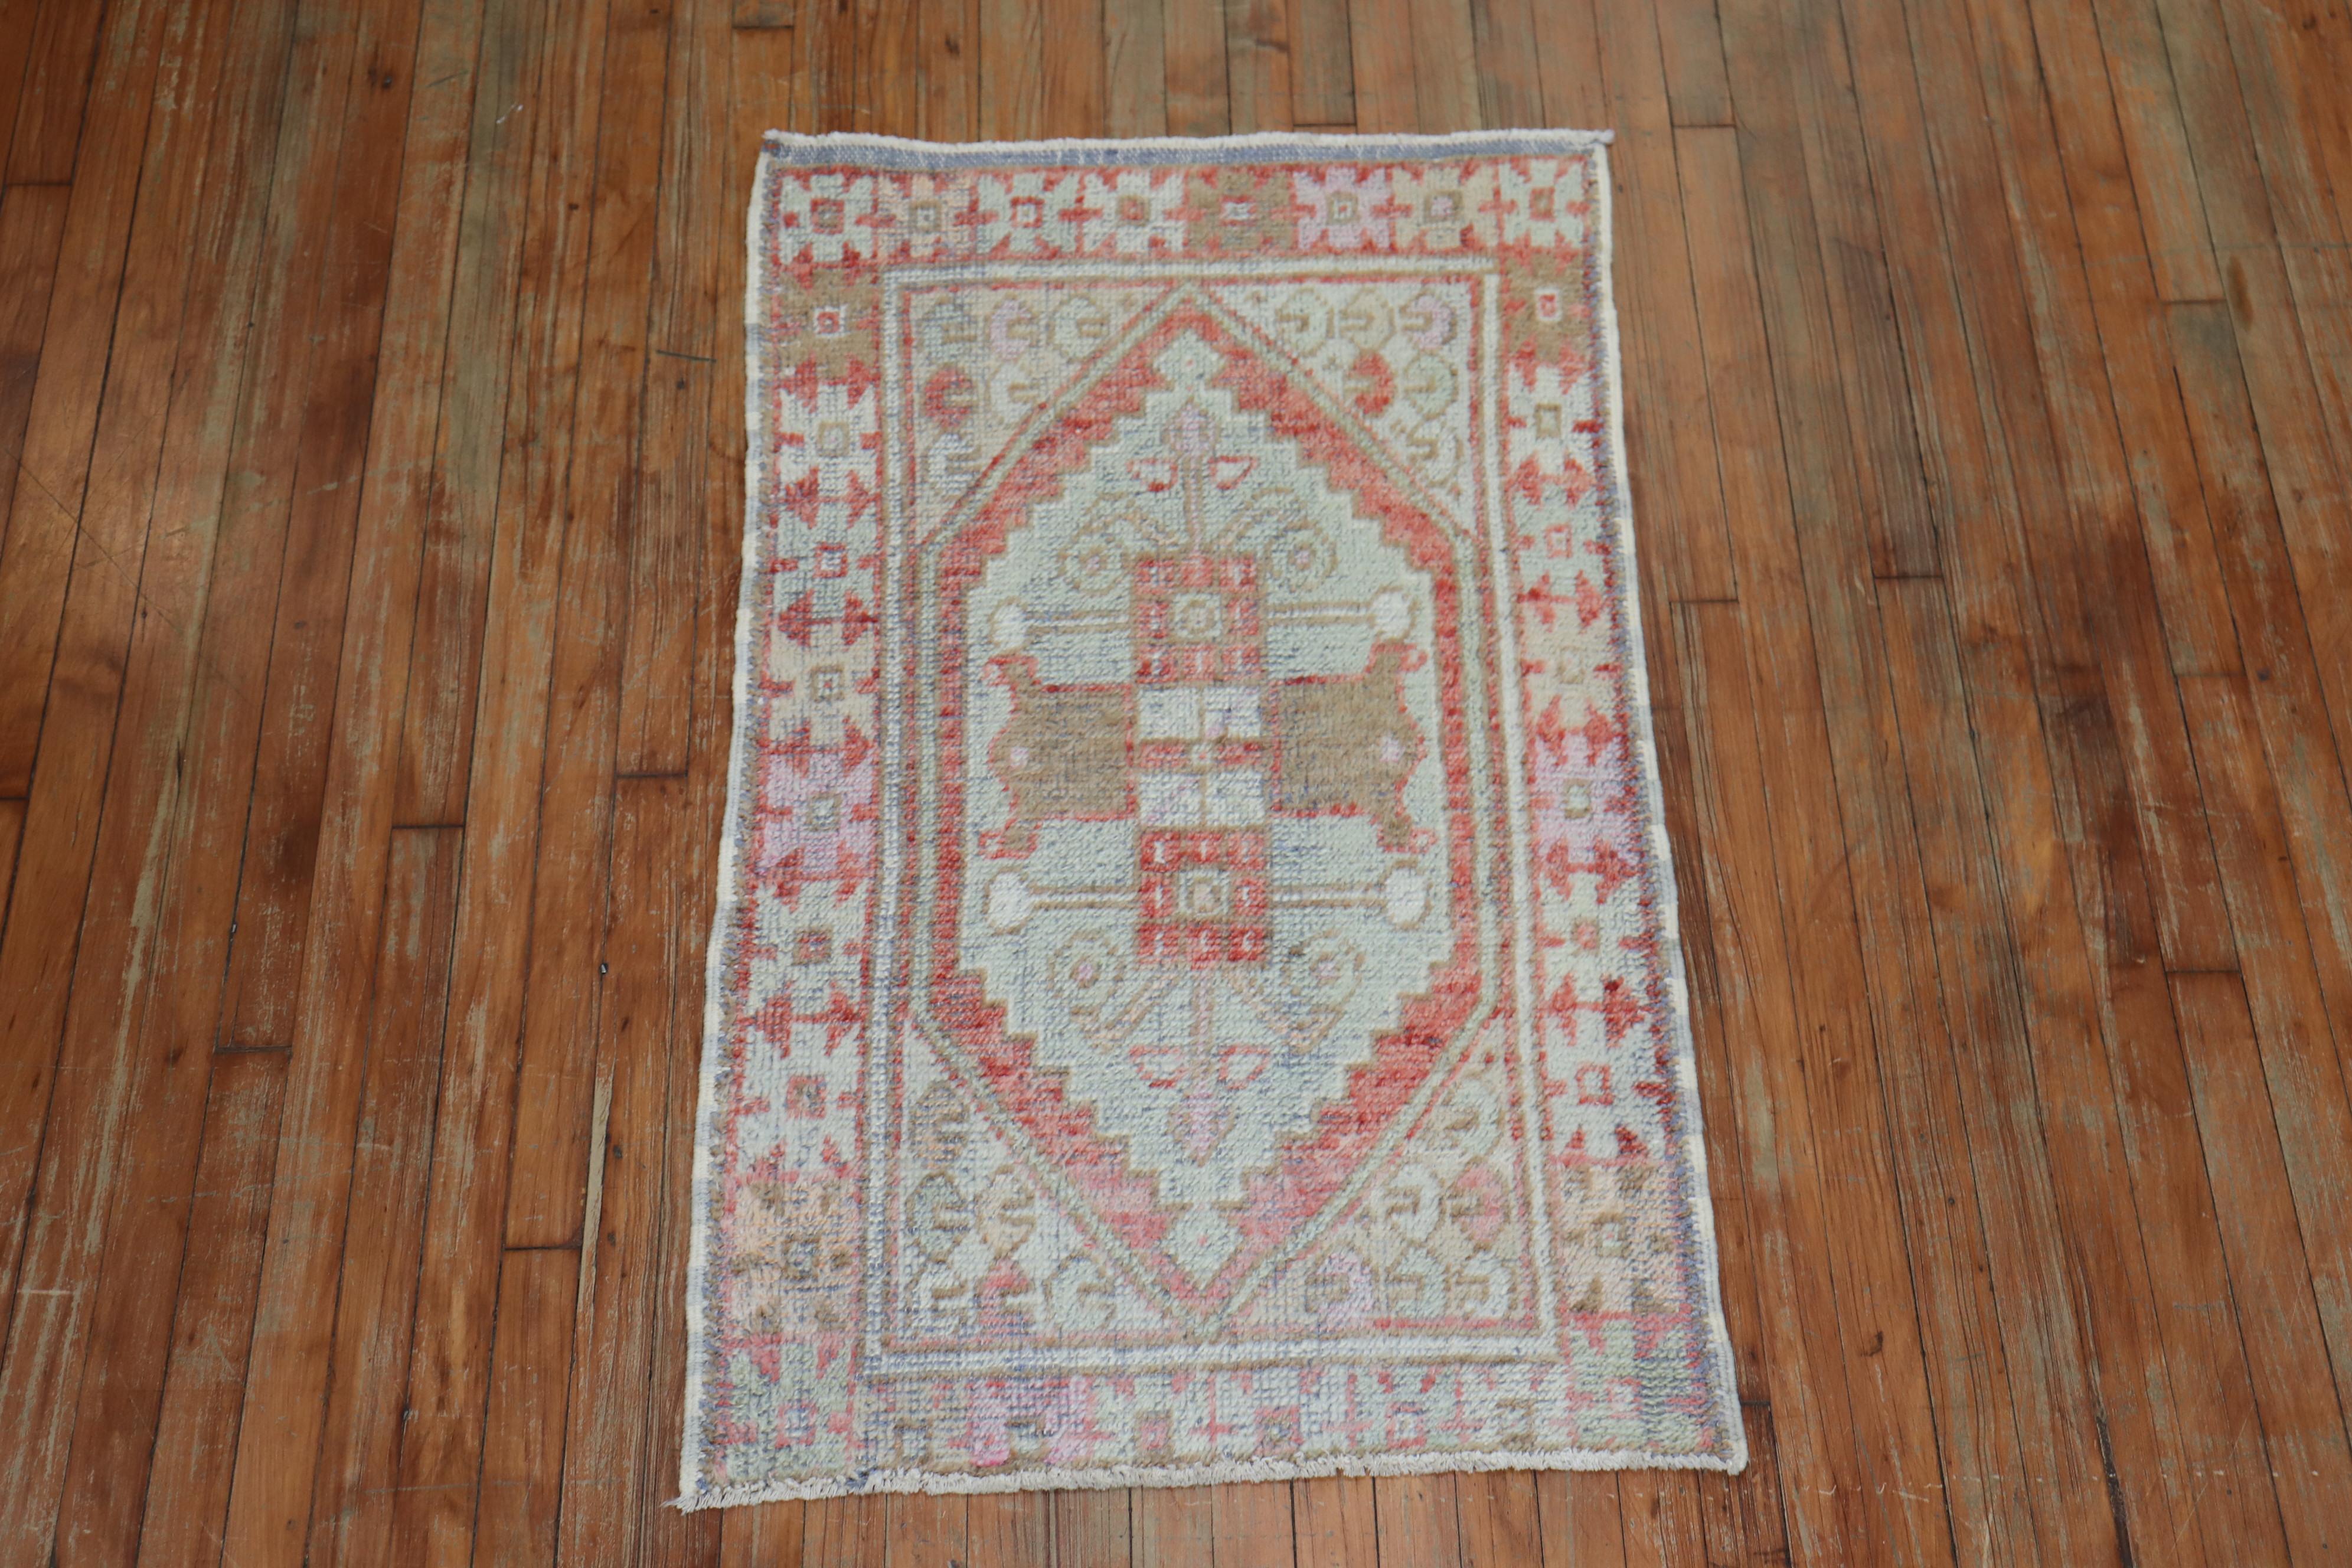 Soft pink coral color midcentury Turkish Anatolian rug.

Size: 2'6